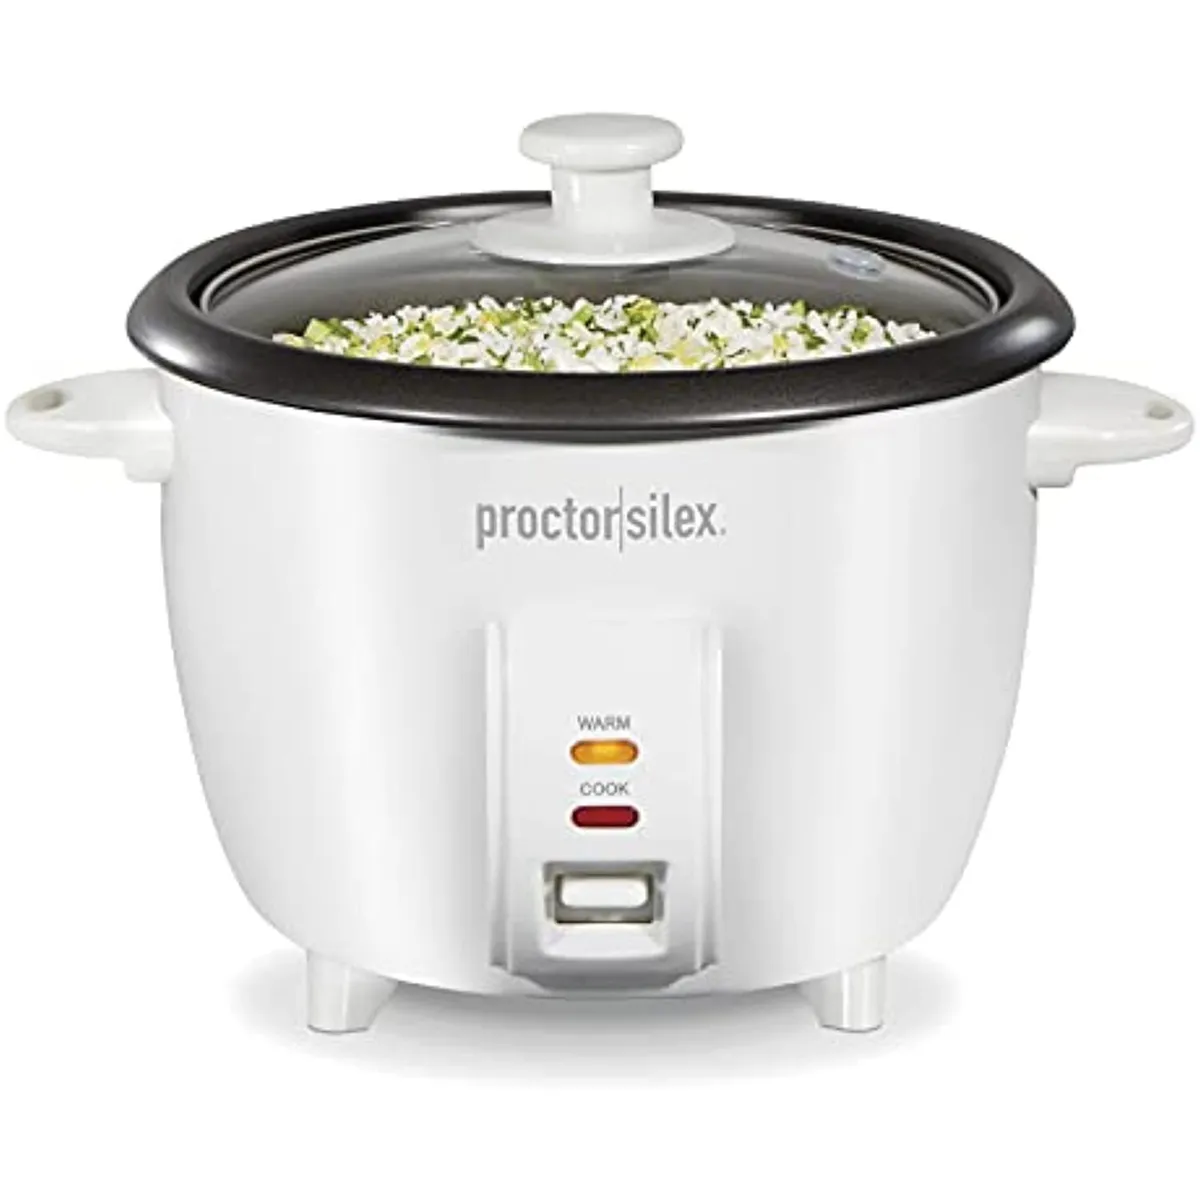 How to make Rice in Oster Rice Cooker 